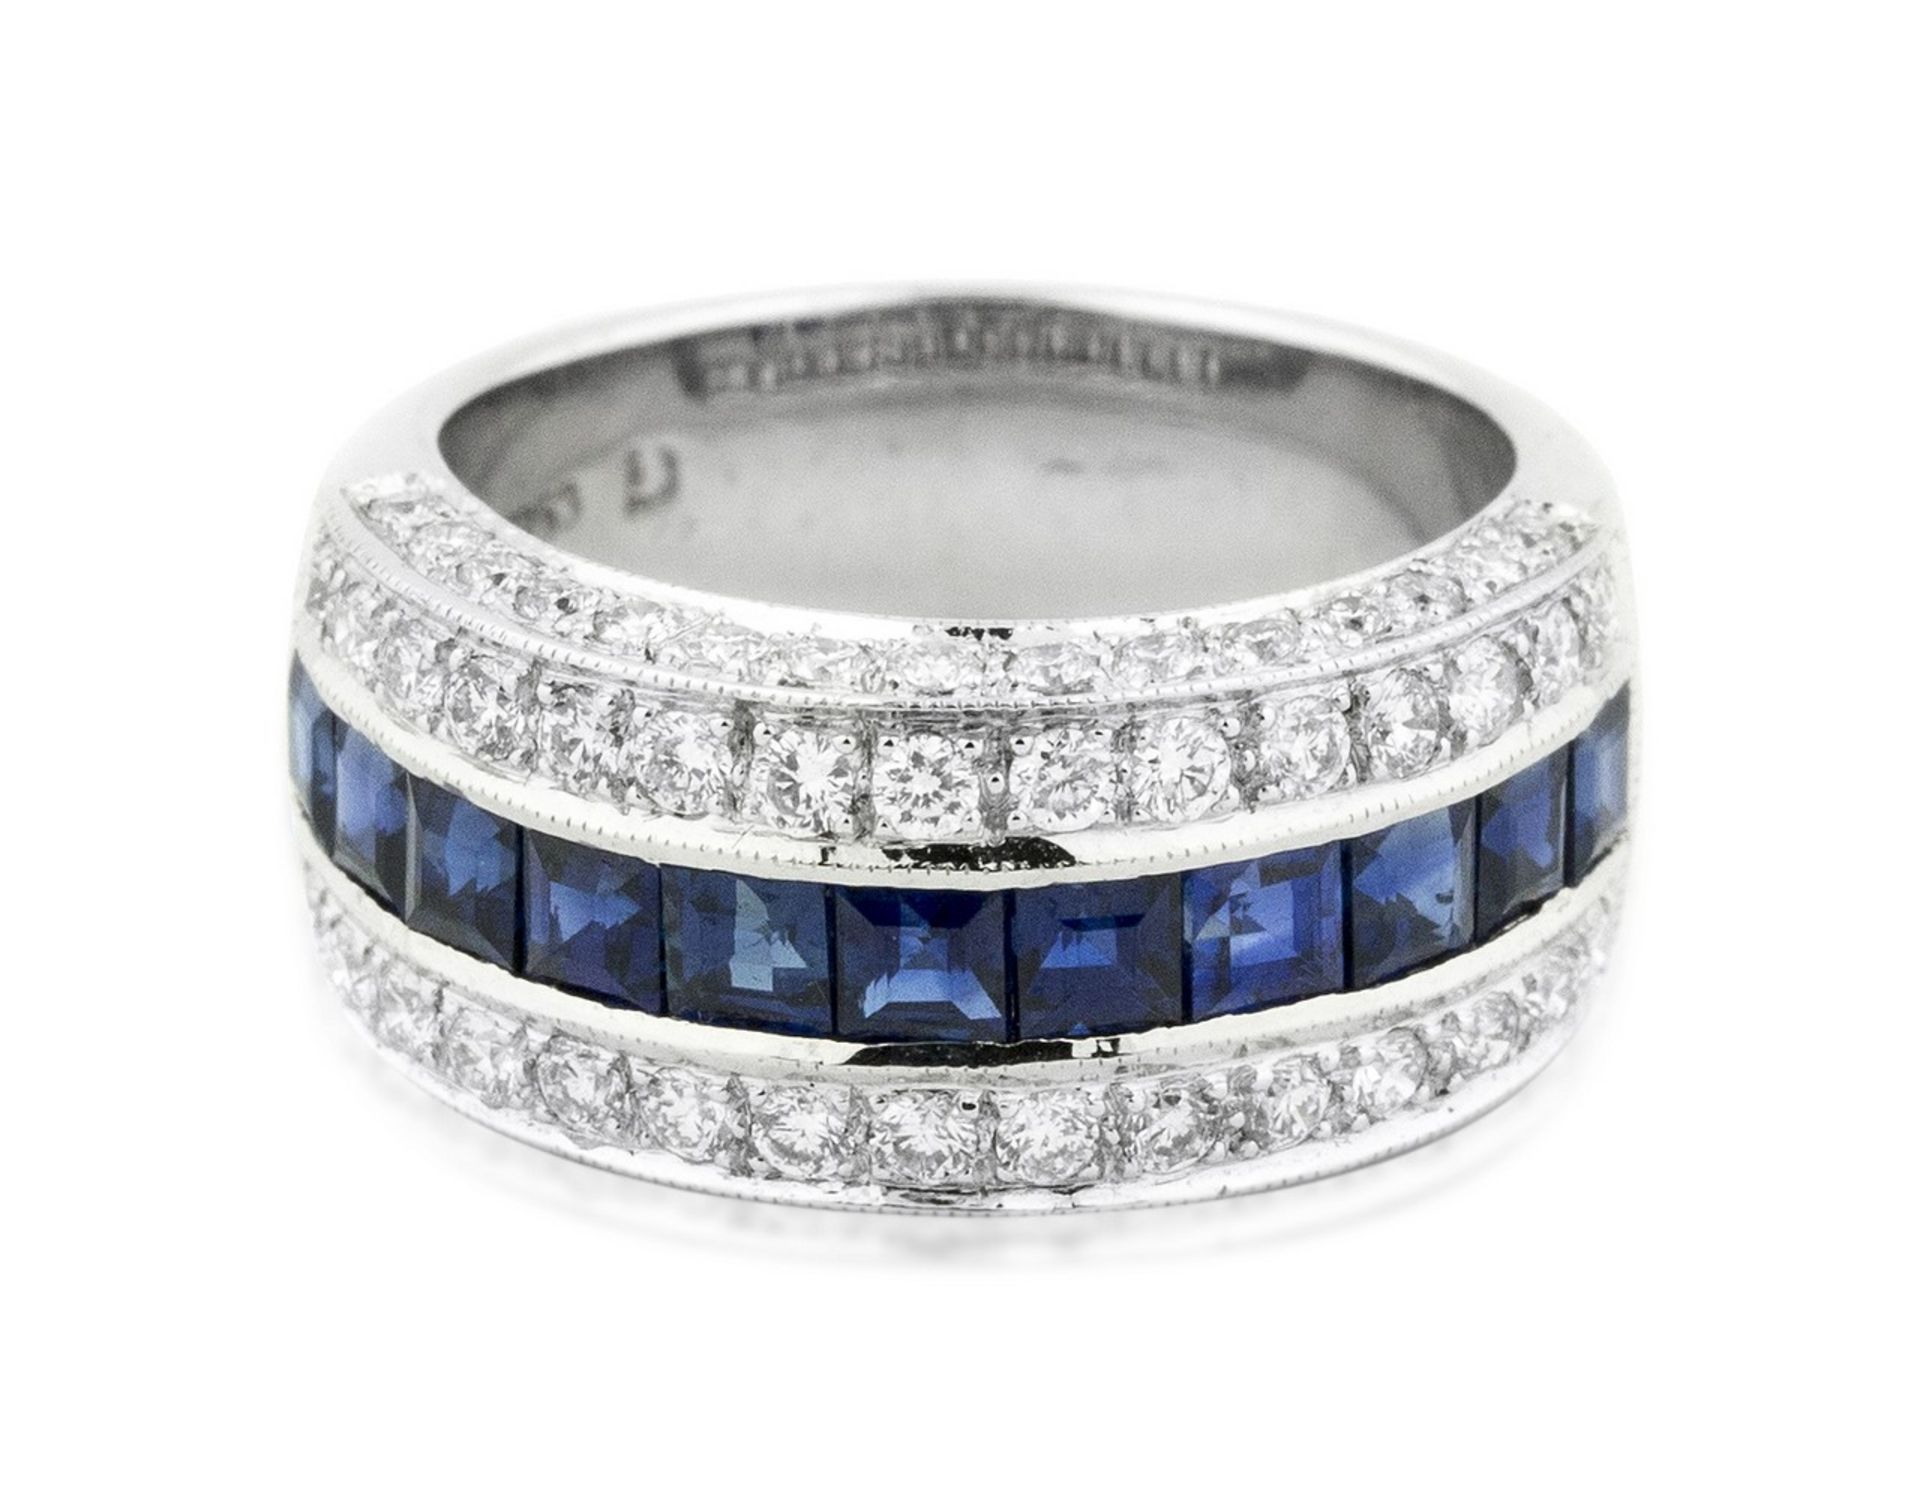 18 KARAT WHITE GOLD SAPPHIRE AND DIAMOND RING The band ring set with calibri-cut sapphires,